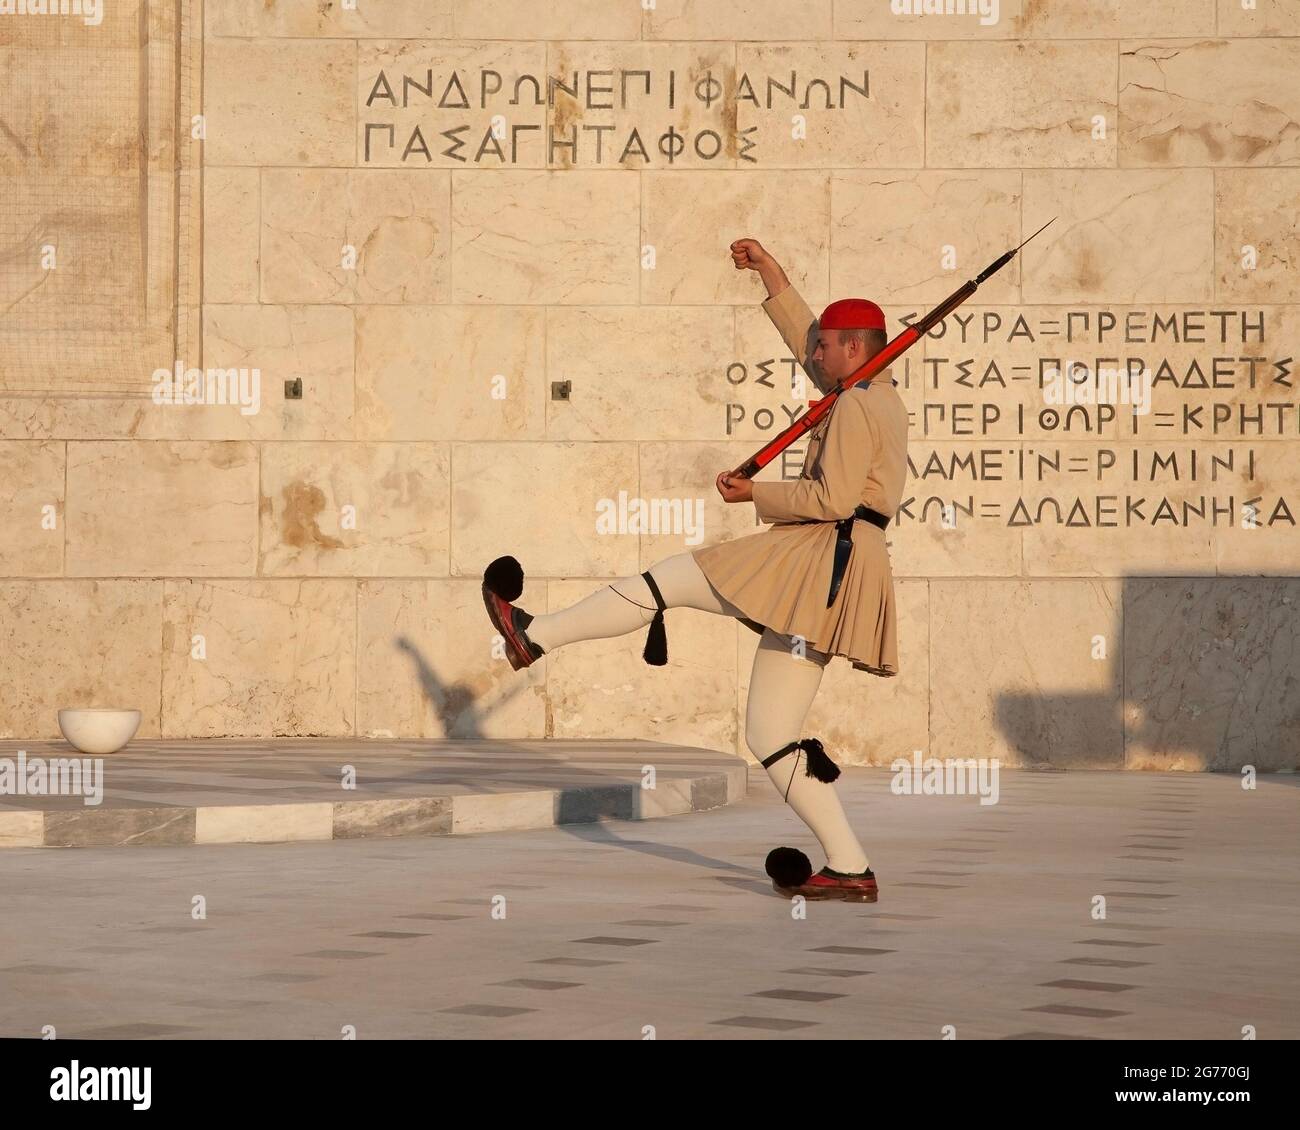 Changing of the presidential guard in Athens beside the wall of the Greek Parliament with Thucydides quotations from Pericles Funeral Oration Stock Photo